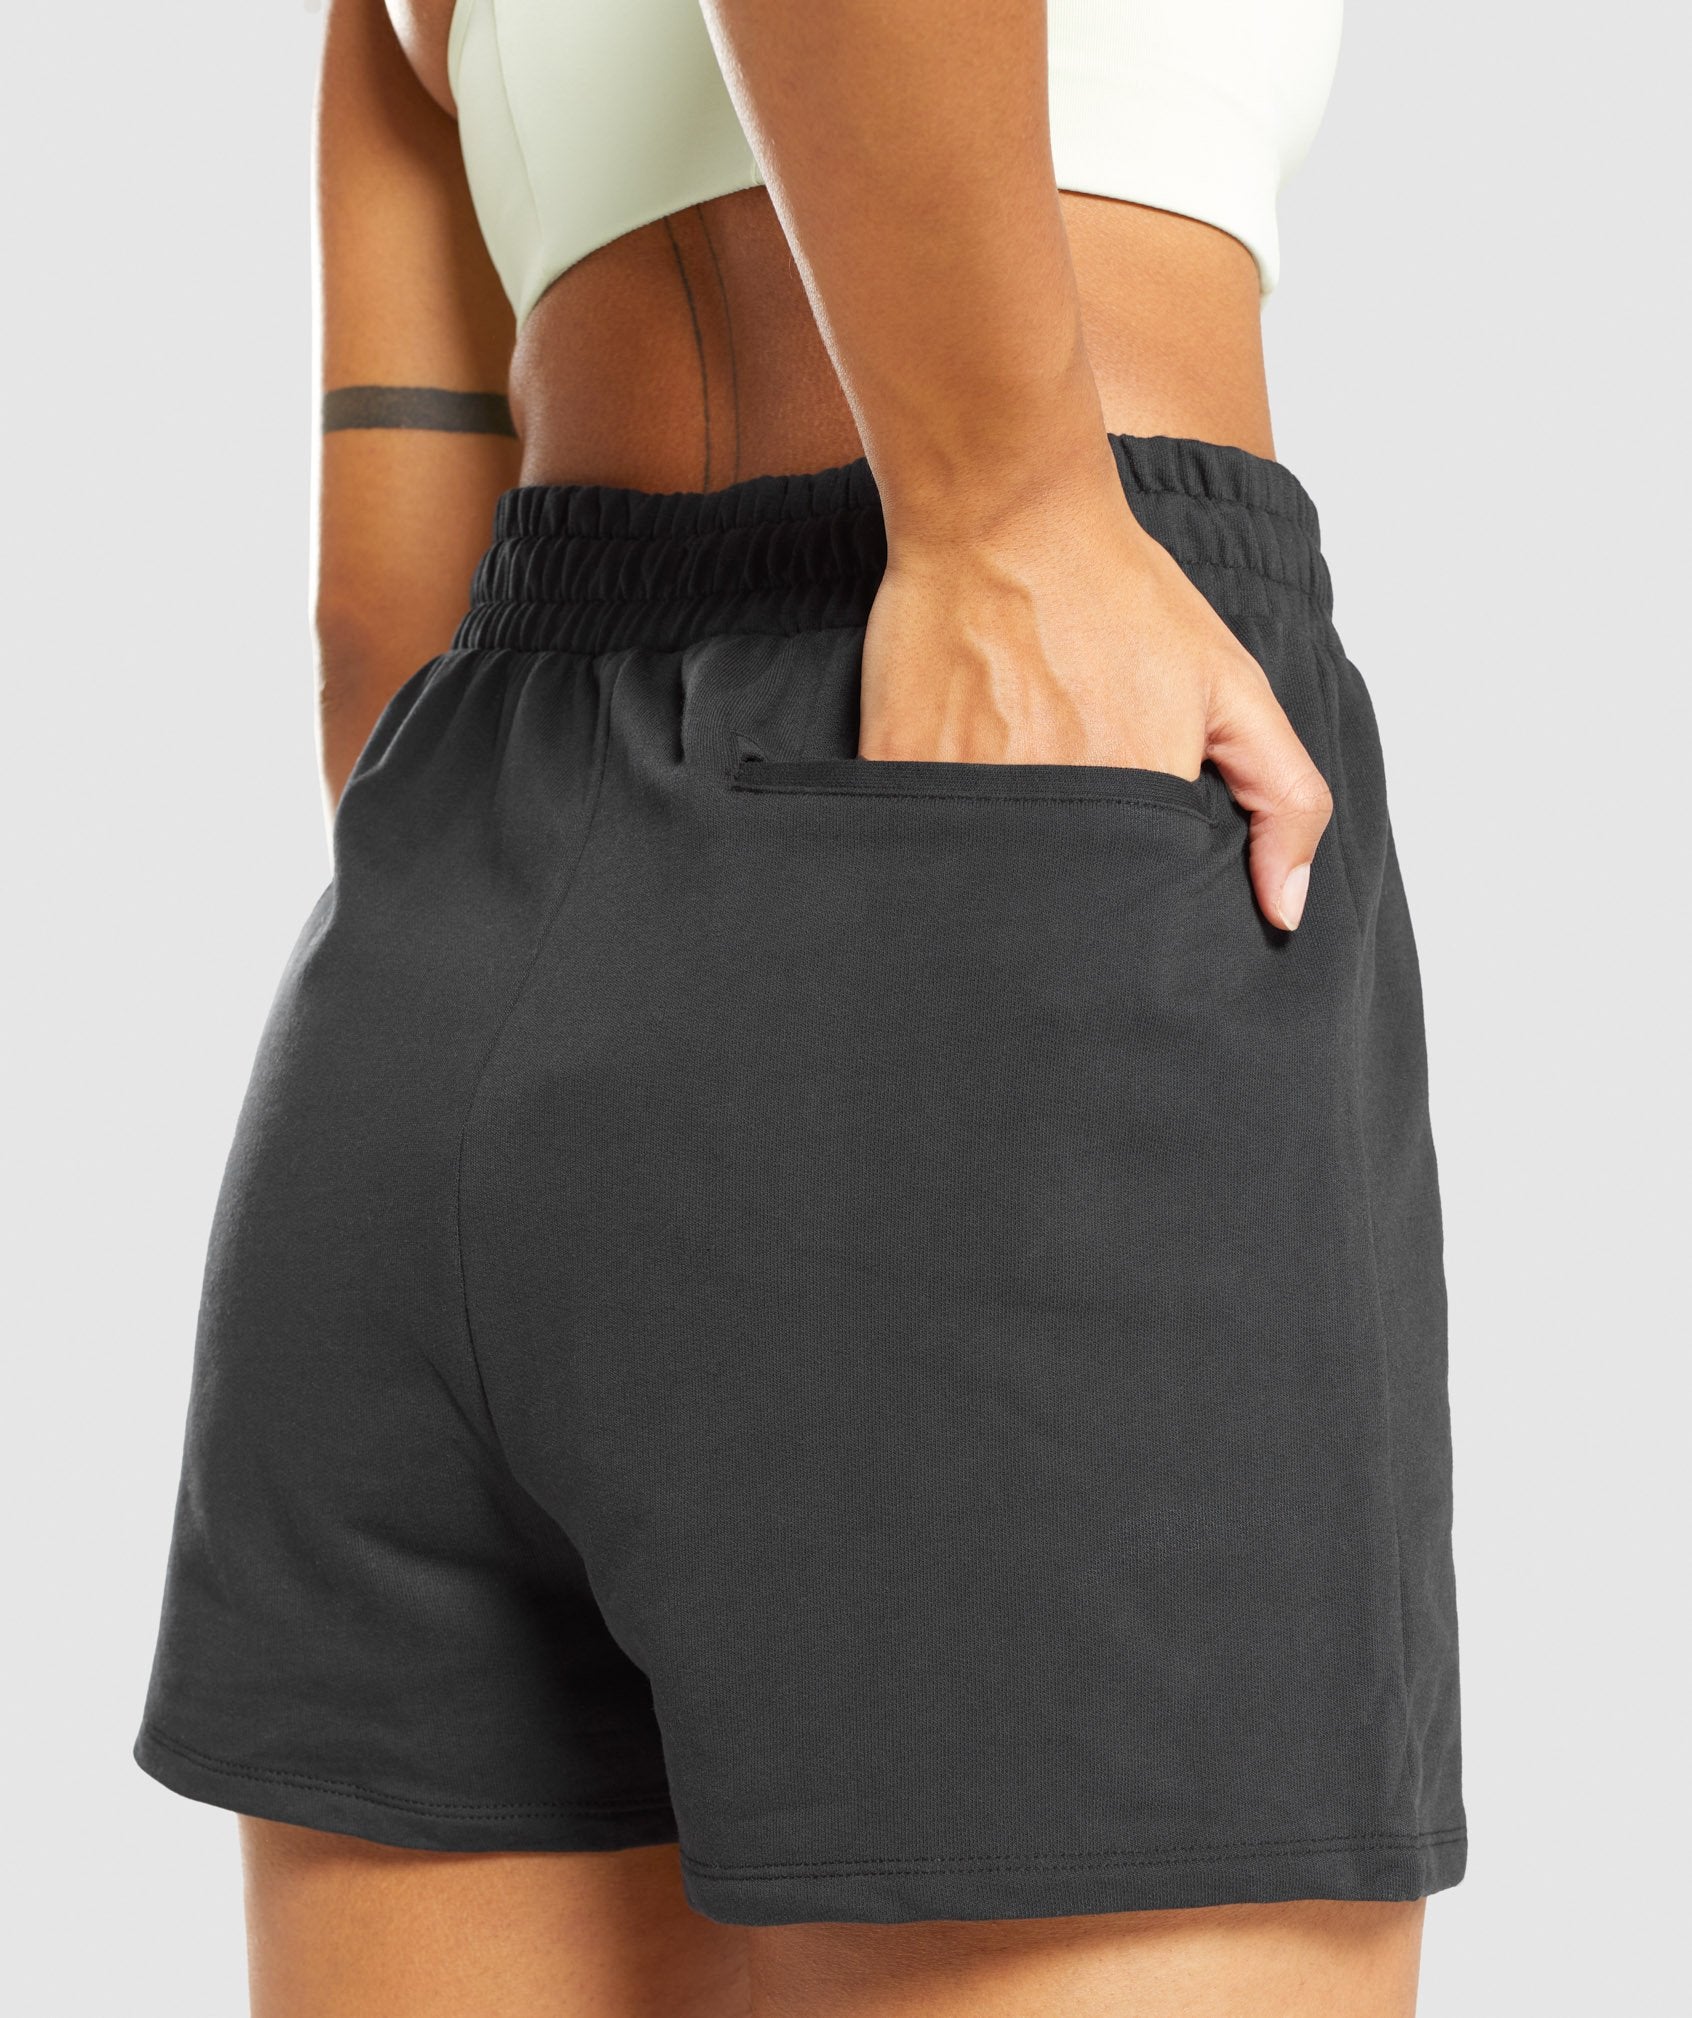 Slim Fit Throw On Shorts in Black - view 6